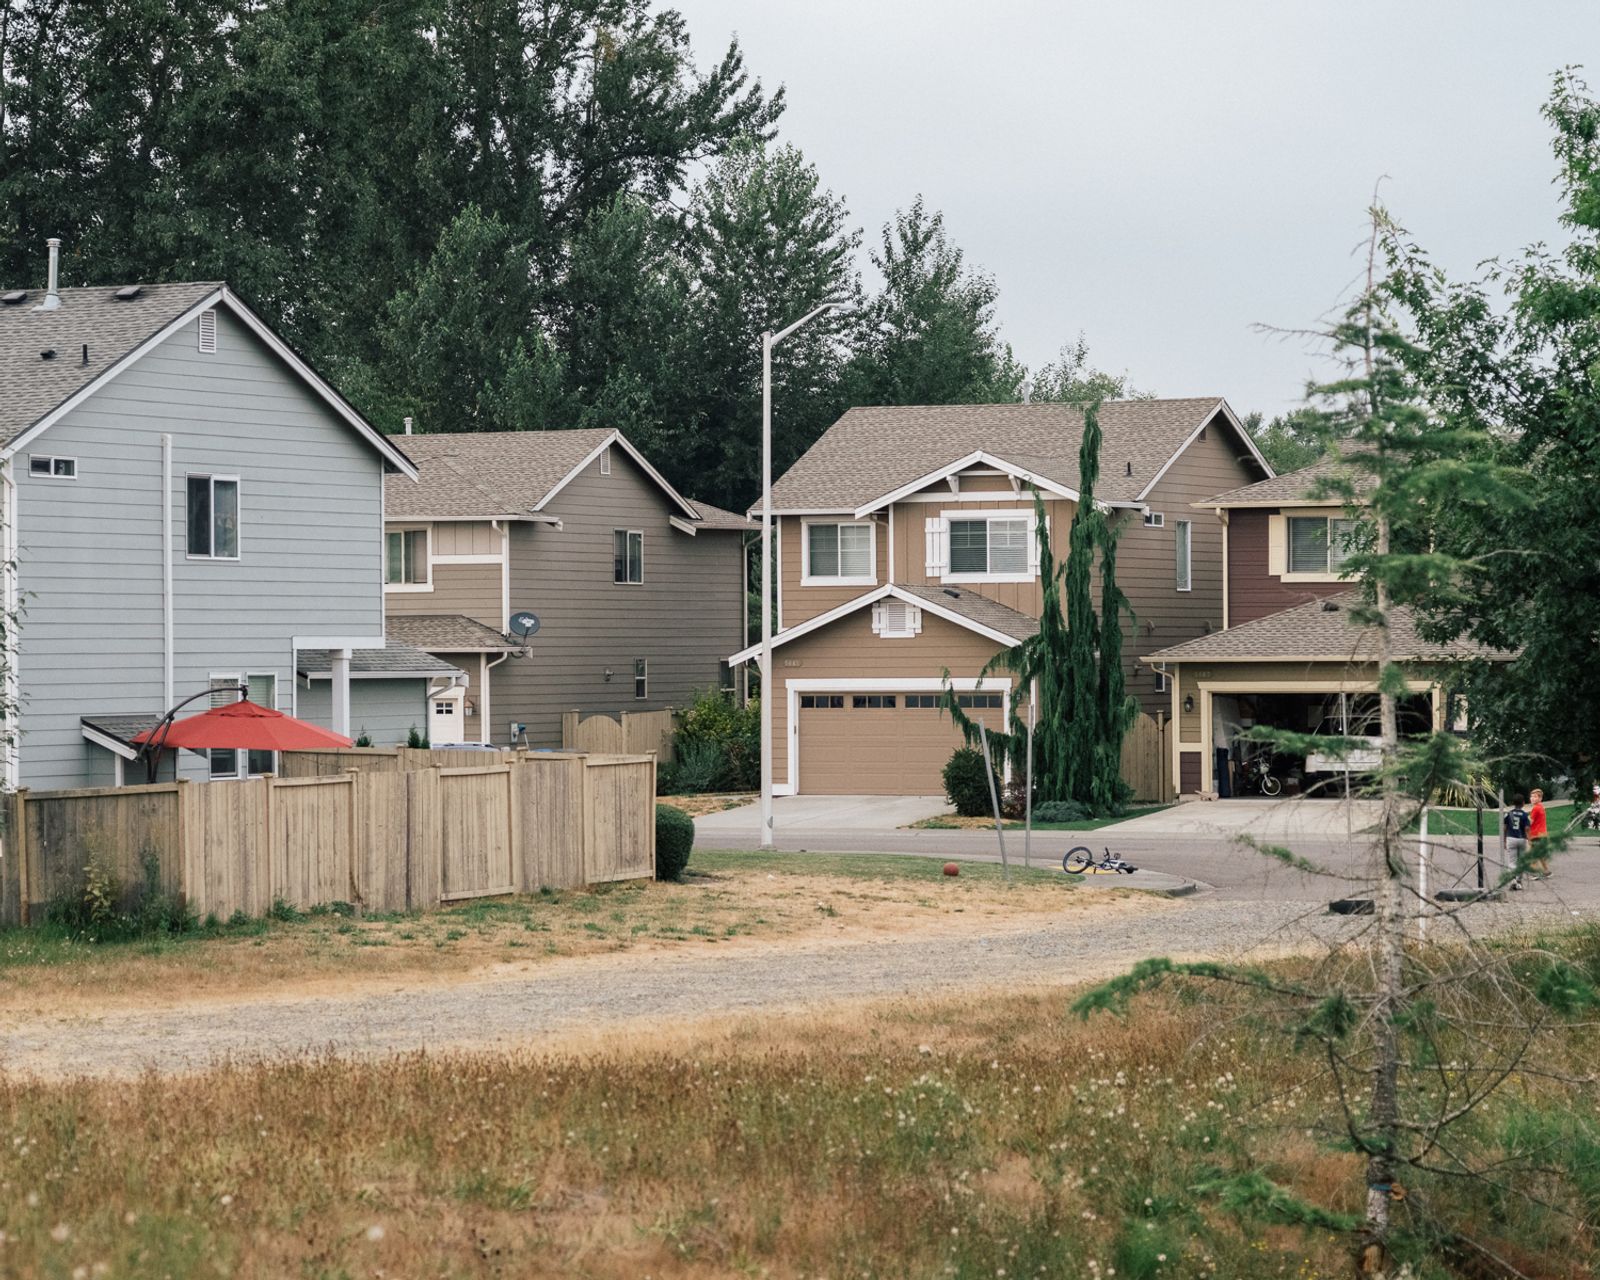 © Alana Celii - A subdivision near the banks of the Puyallup River in Fife, WA.